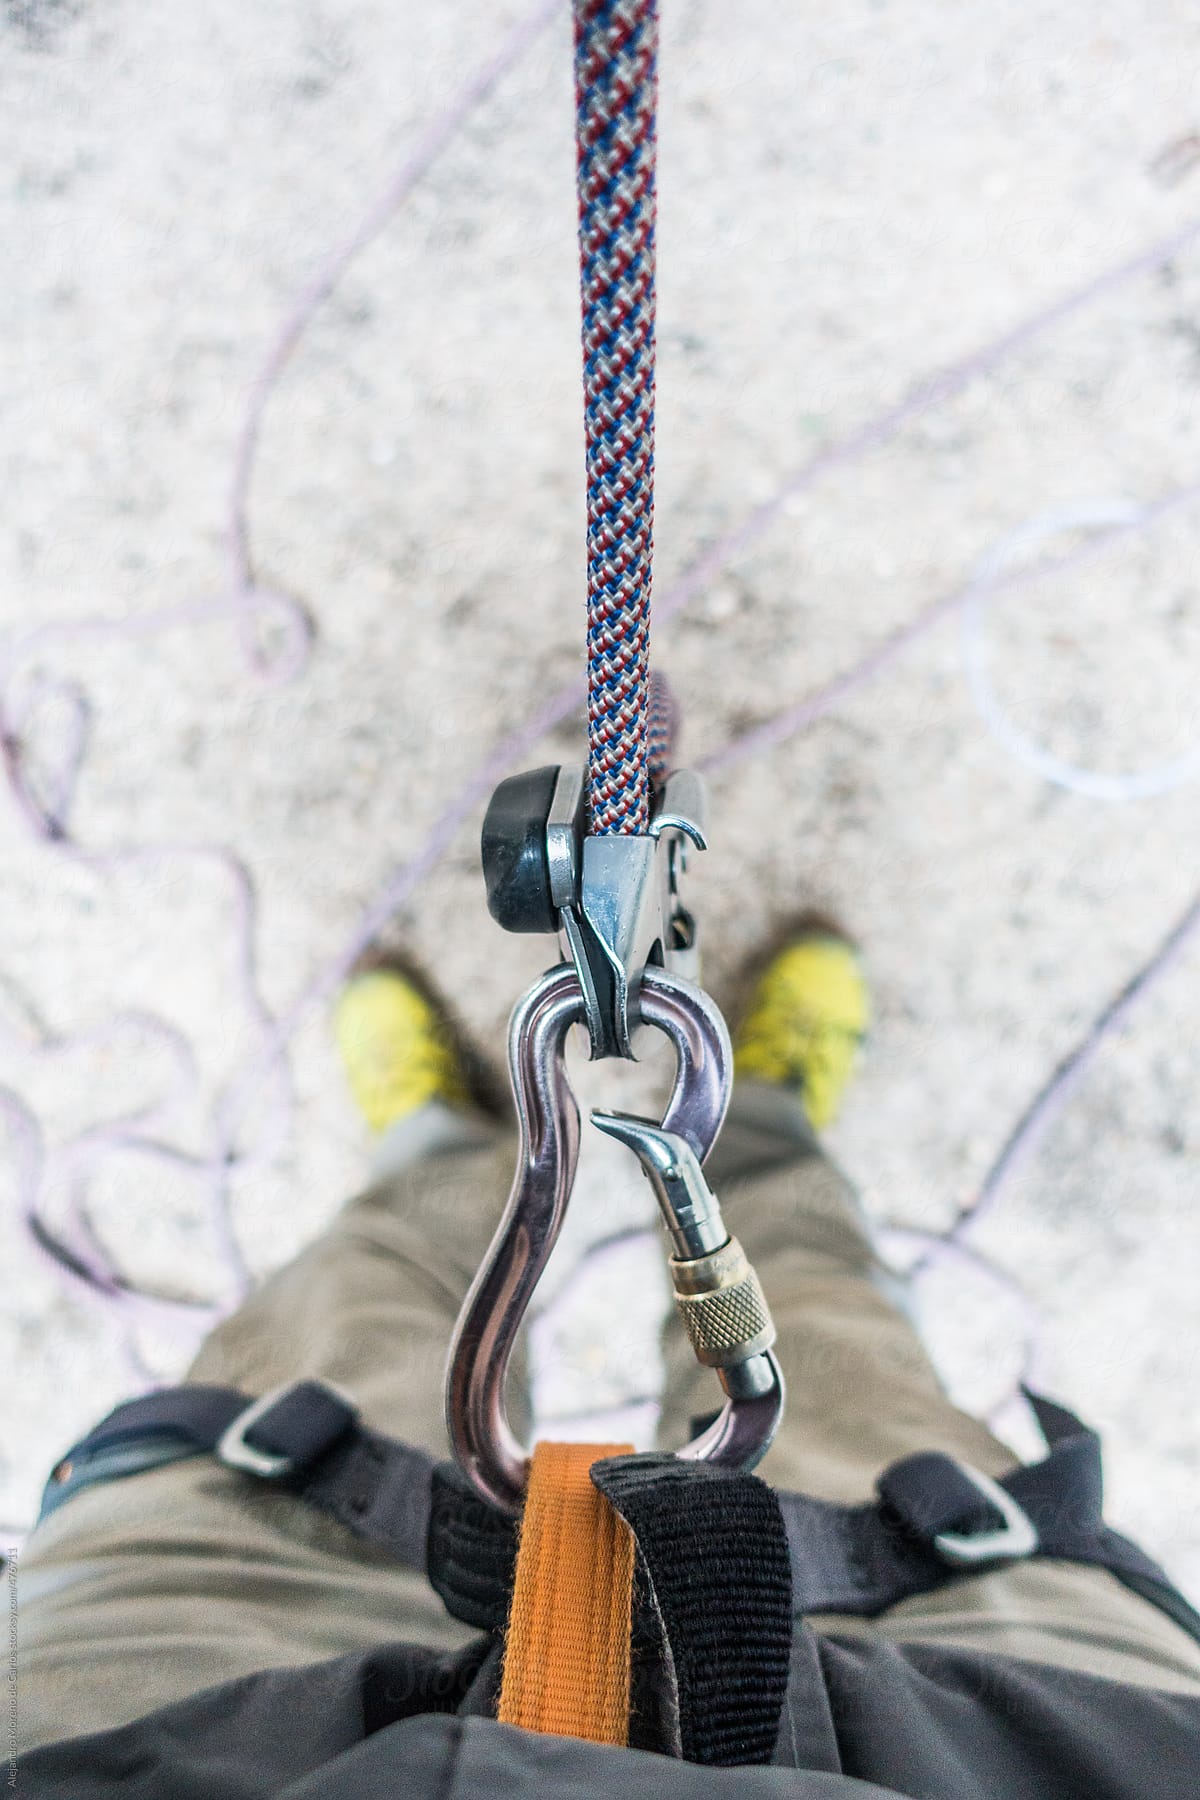 POV view of a man belaying in rock climbing